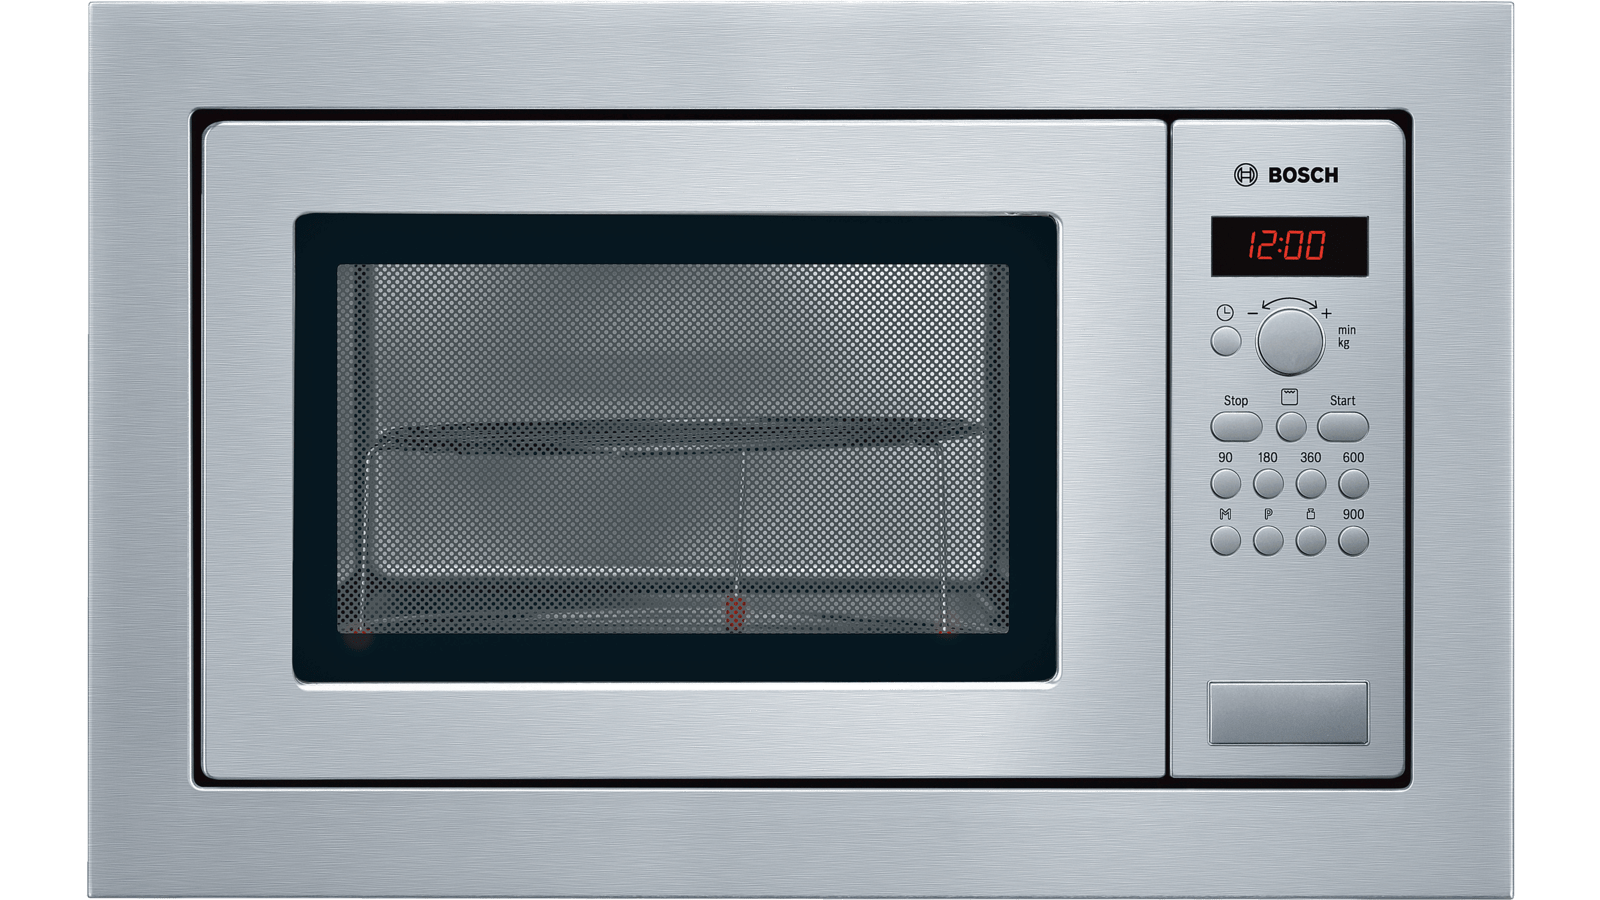 Hmt84g651b Built In Microwave Oven Bosch Gb